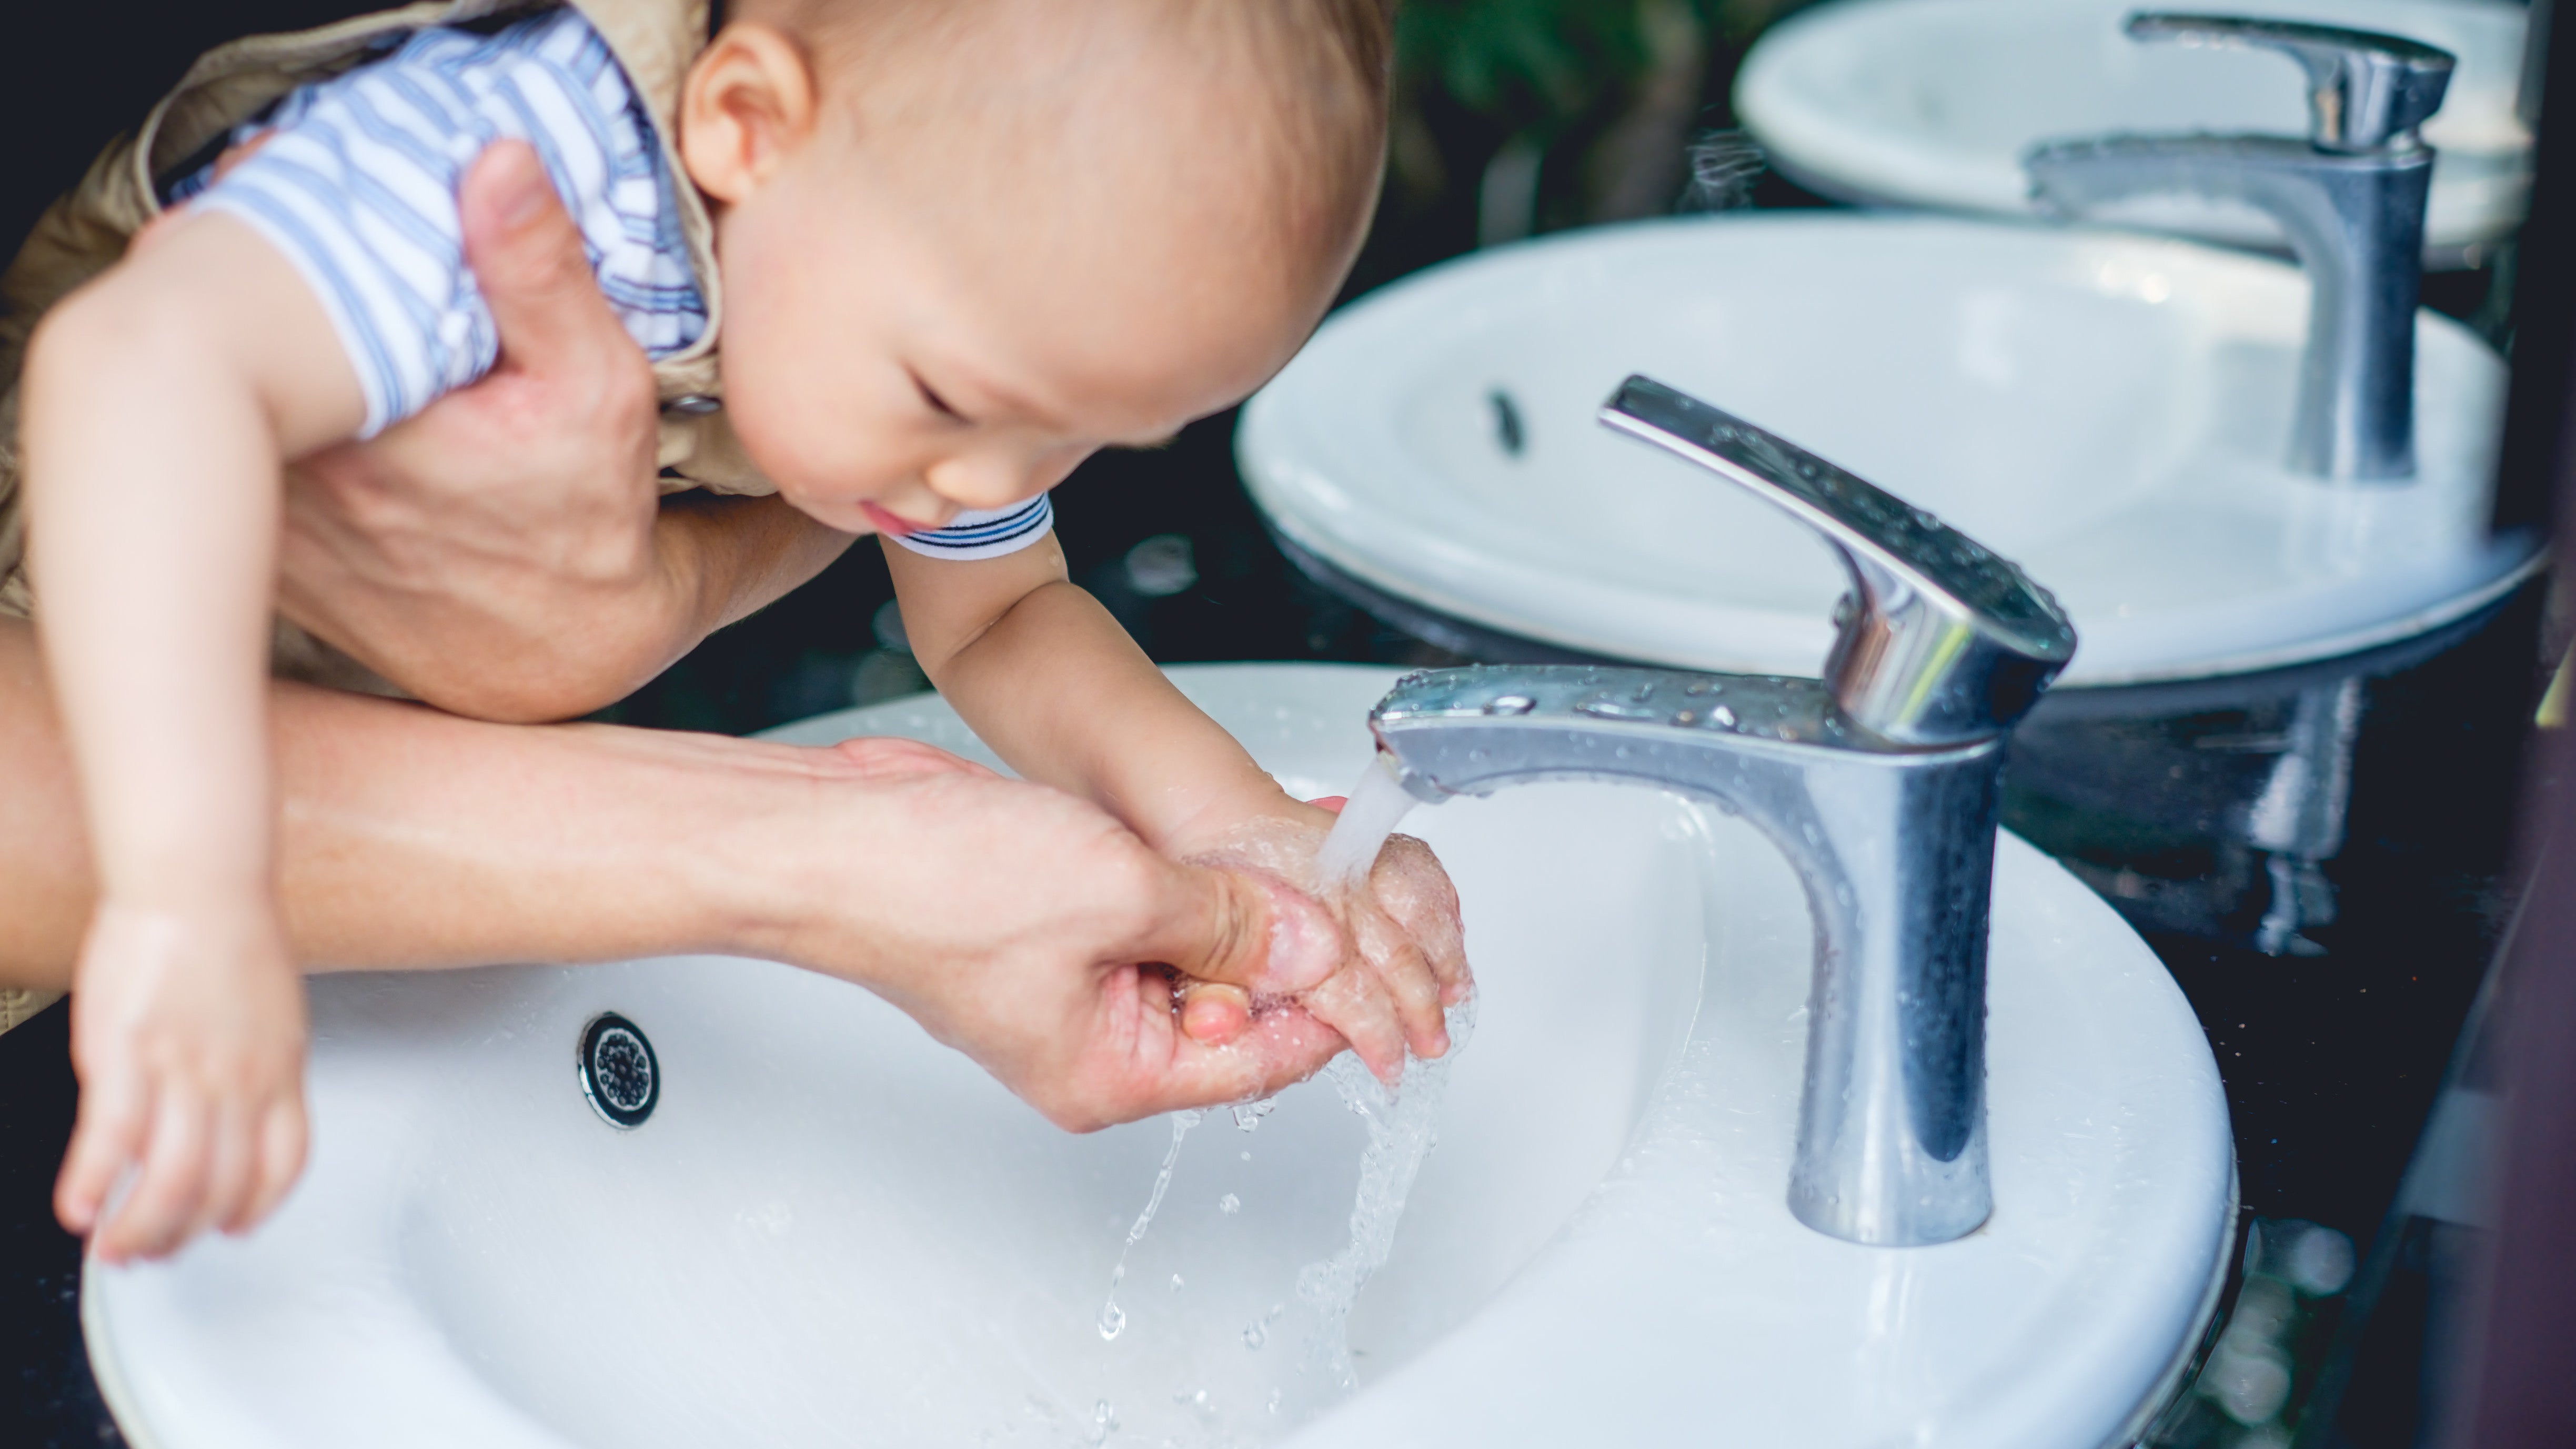 How To Wash Your Baby’s Hands